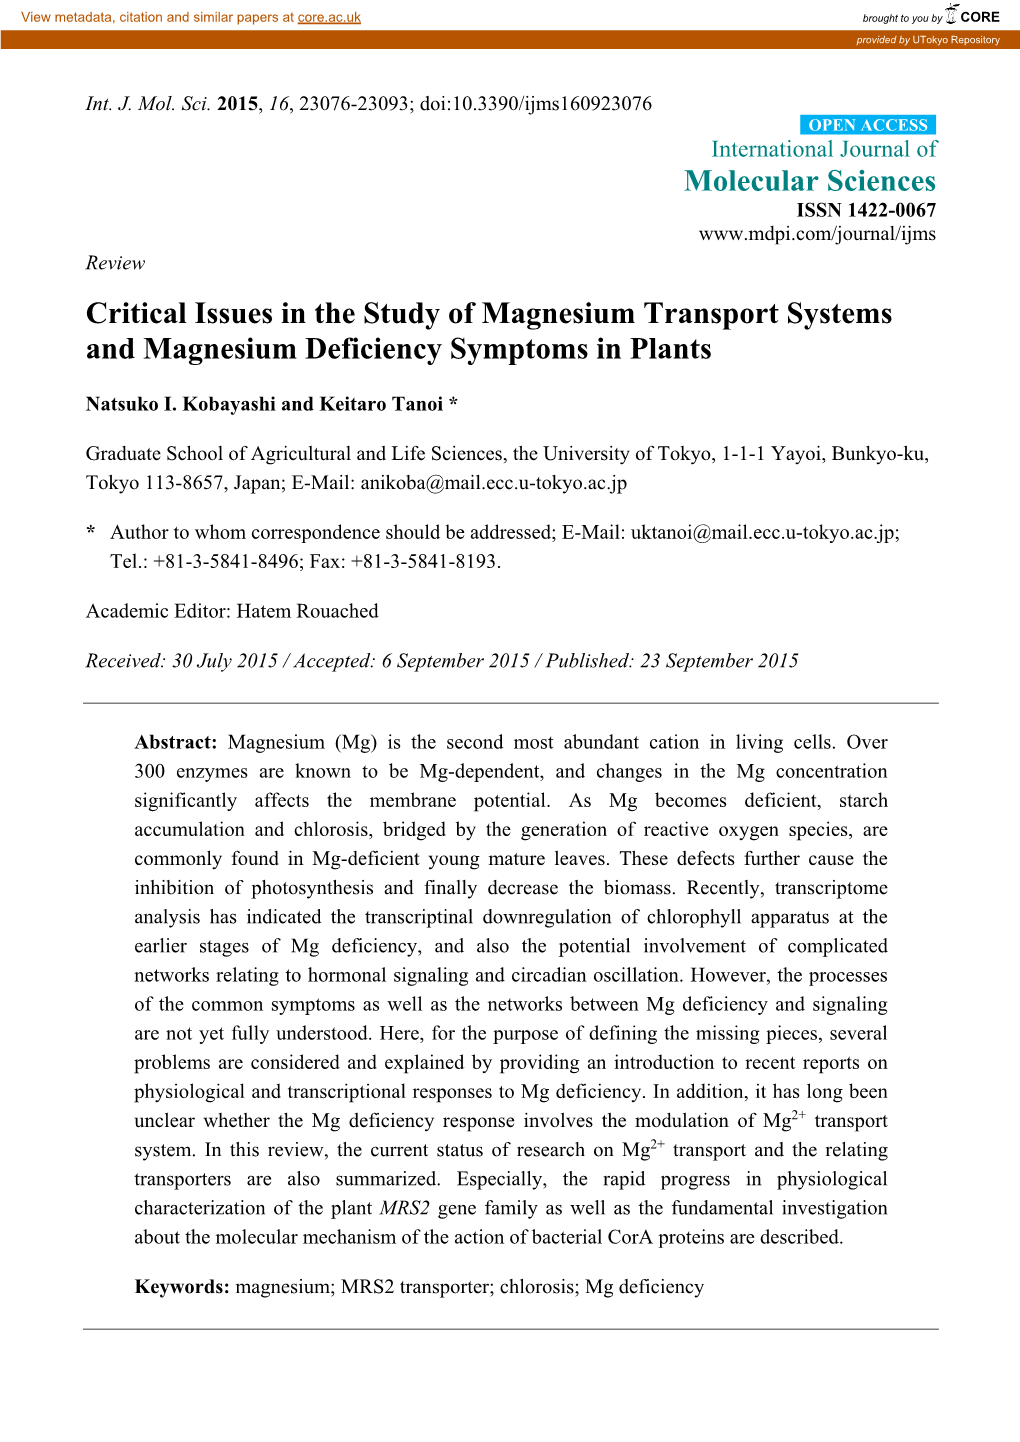 Critical Issues in the Study of Magnesium Transport Systems and Magnesium Deficiency Symptoms in Plants